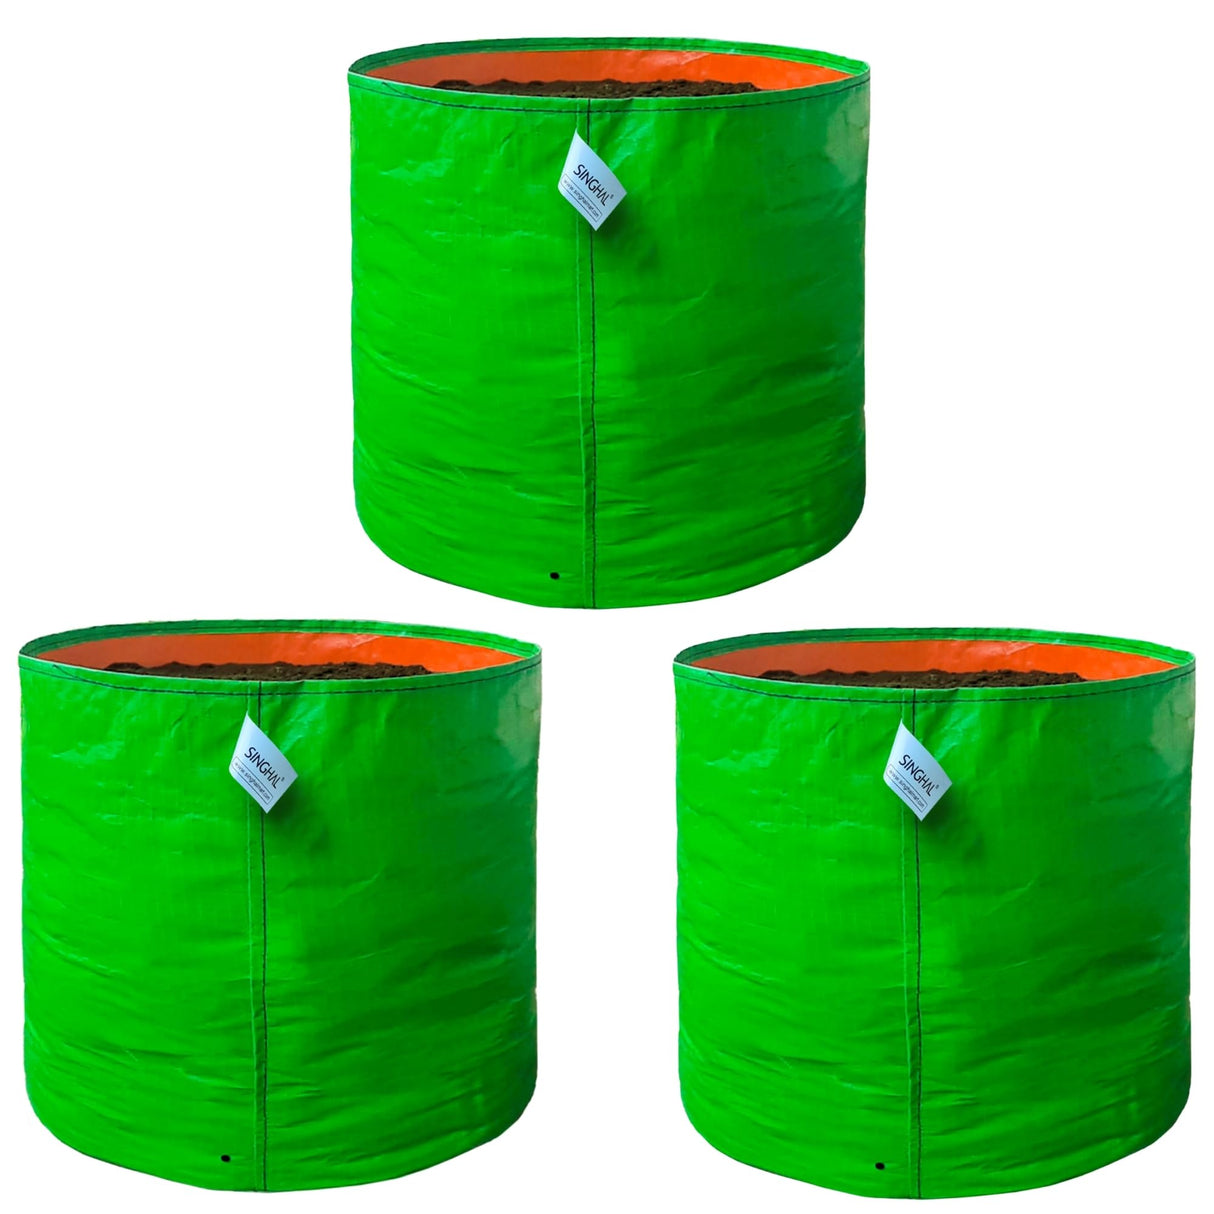 SINGHAL 24x24 inch Big Grow Bags Pack of 3 for Home Gardening, HDPE Plants Bag for Fruits, Vegetables Flowers, 260 GSM Grow Bag, UV Protected